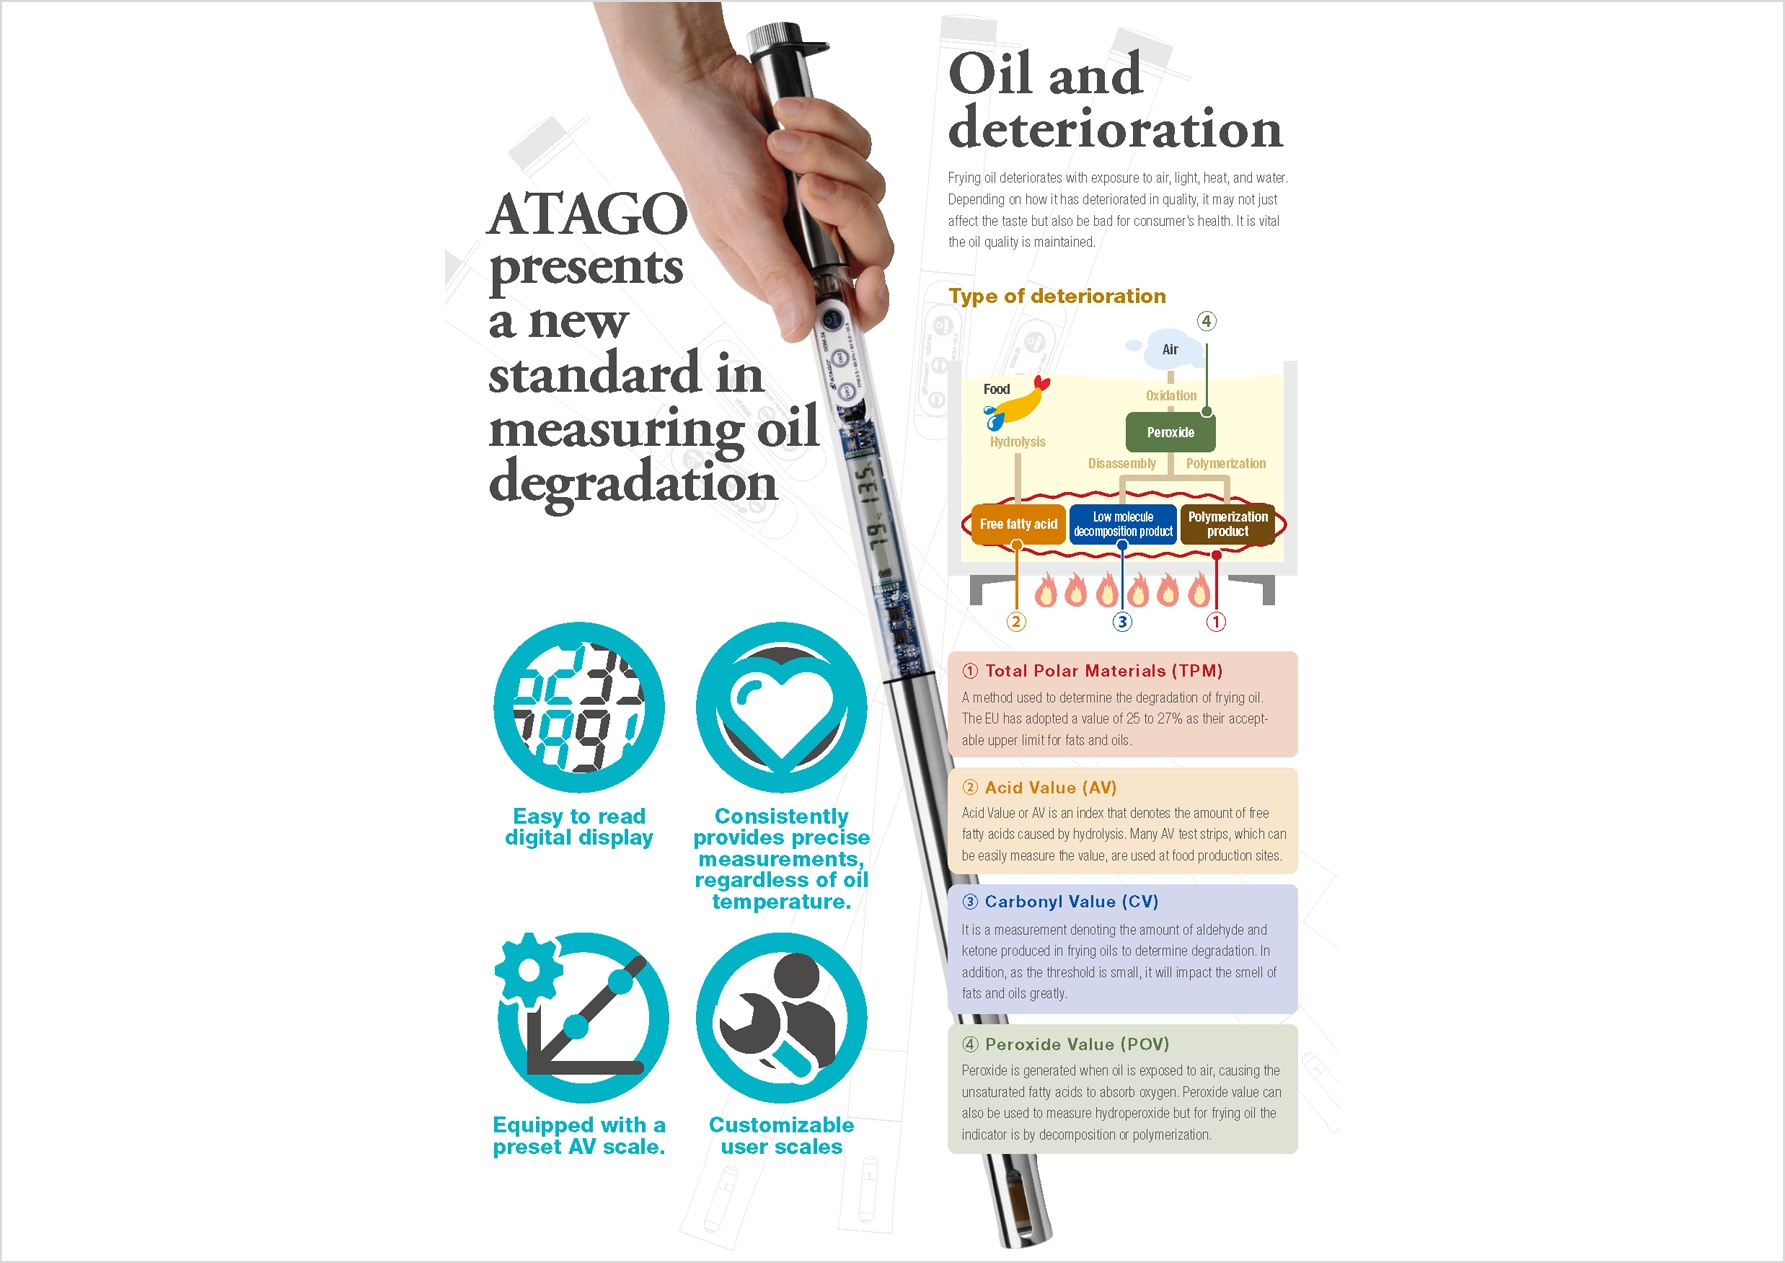 ATAGO presents a new standard in measuring oil degradation / Oil and deterioration